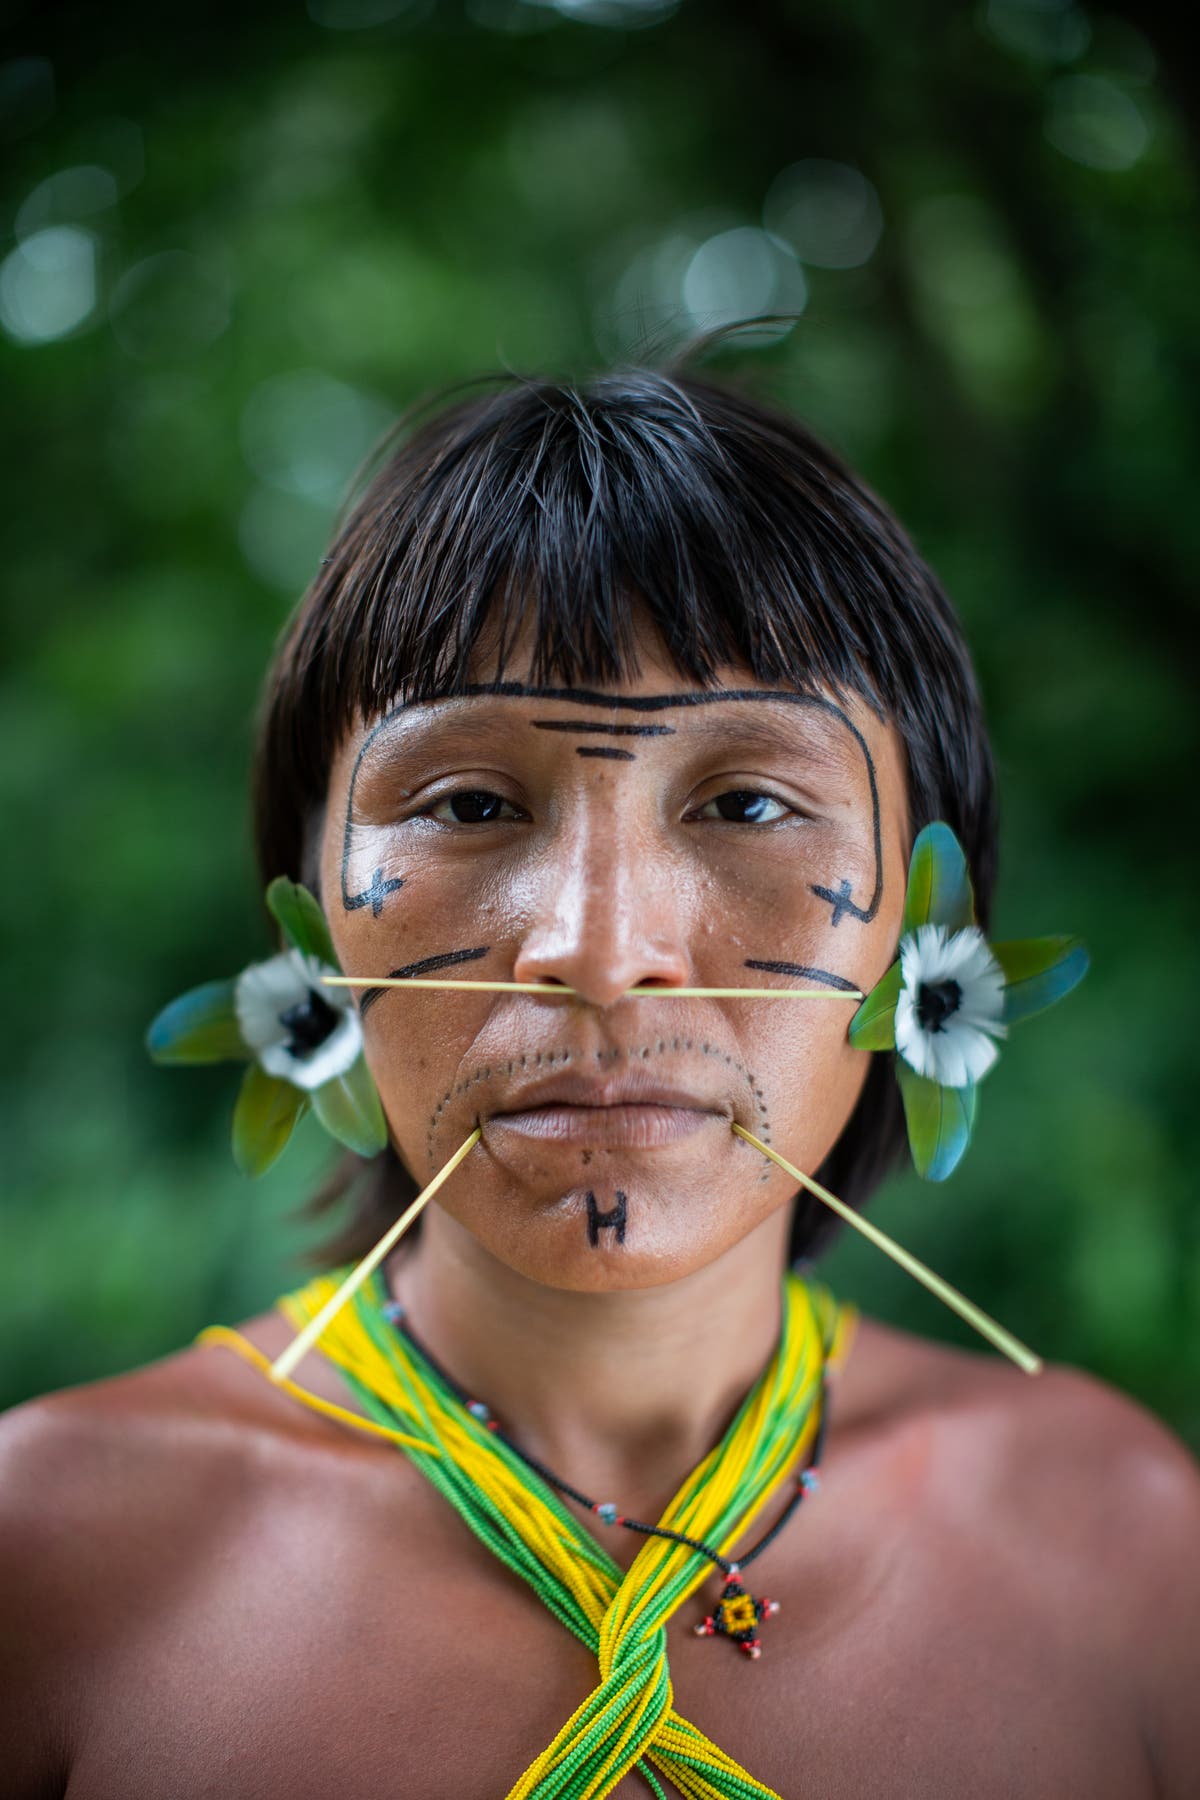 The indigenous tribes fighting the curse of xawara in the Amazon | The